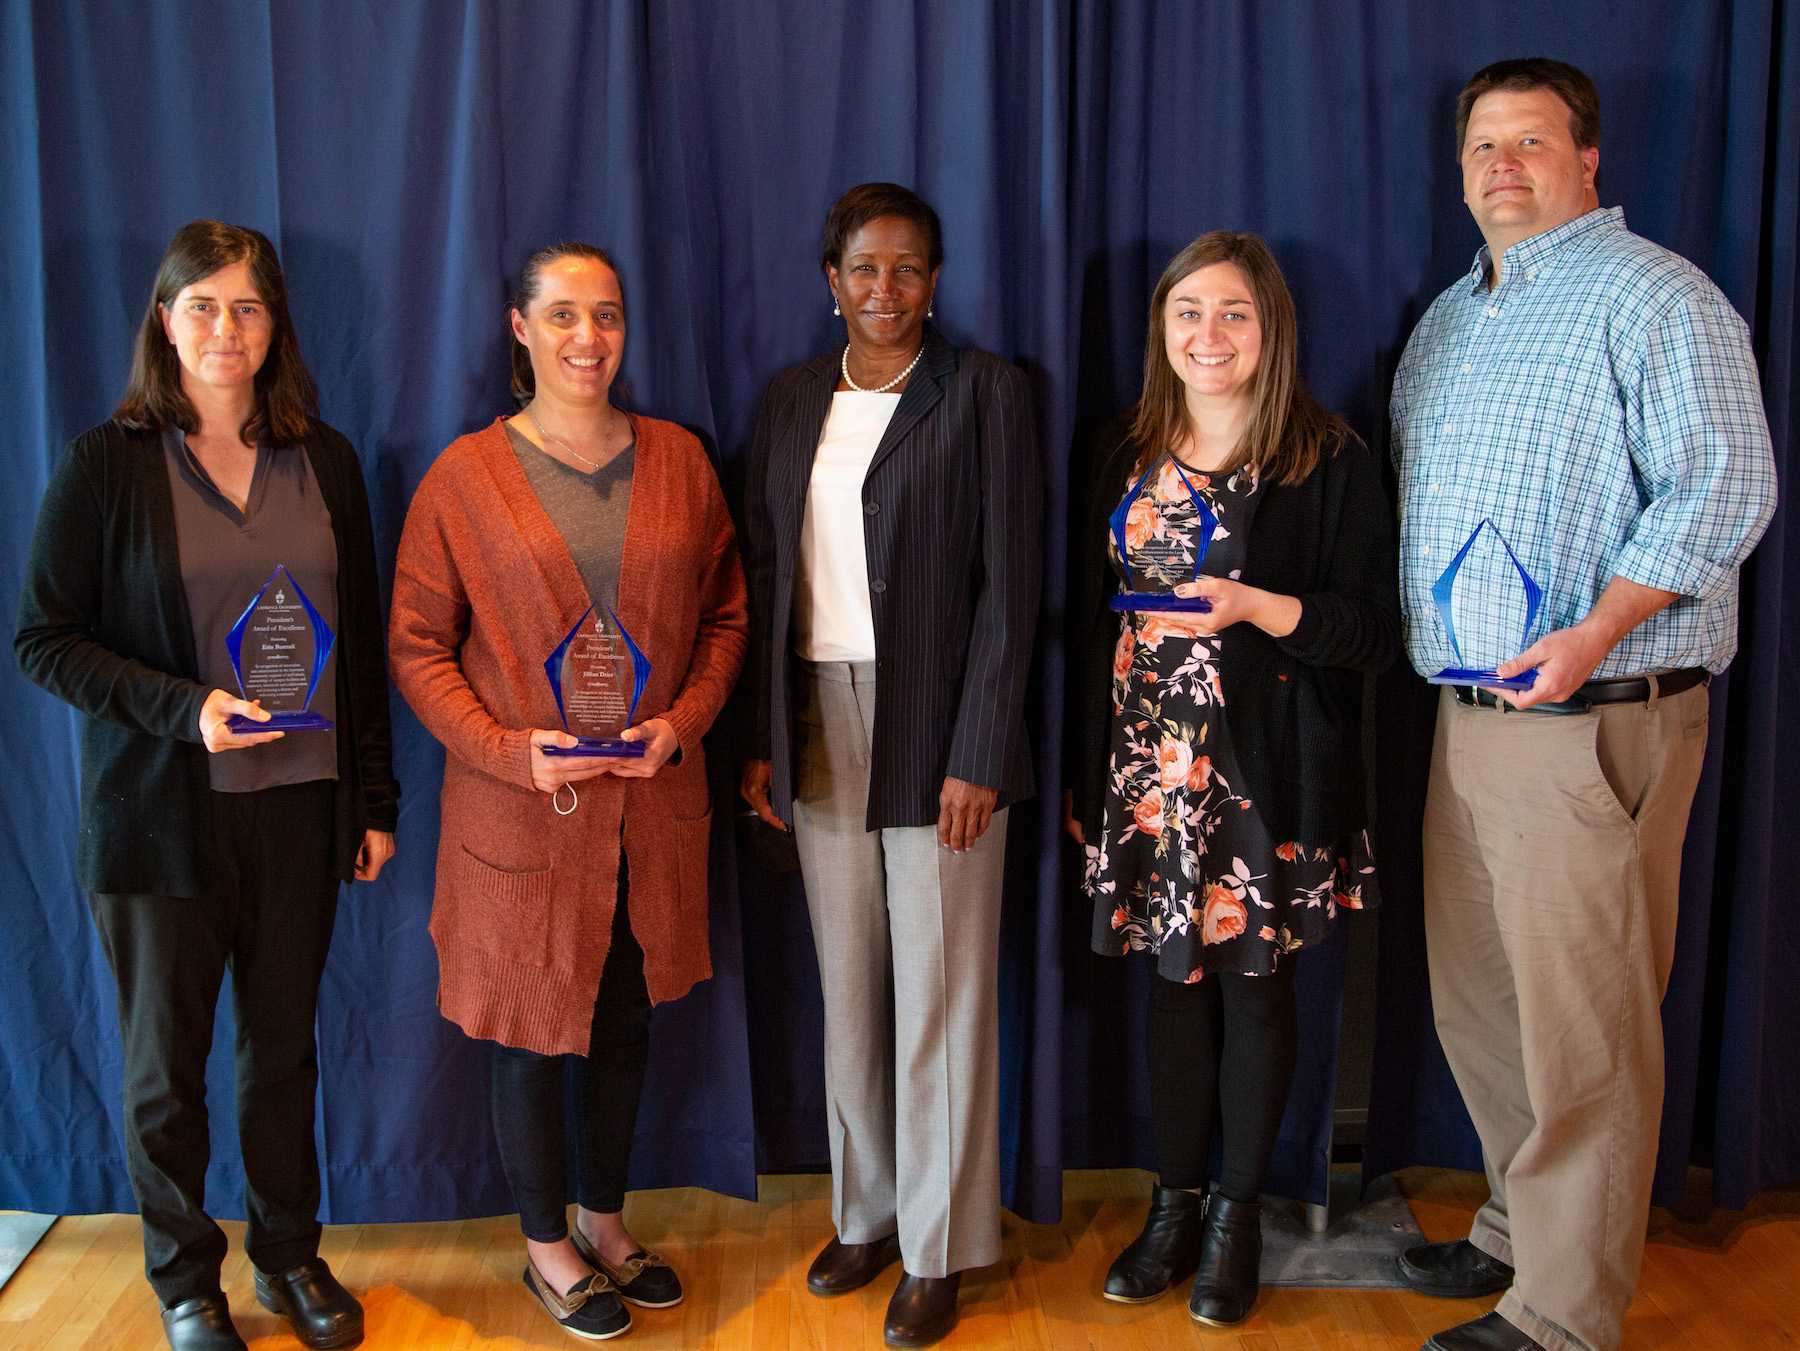 Erin Buenzli, Jillian Drier, Rich Jazdzewski, and Lindsey Wyngaard pose for a photo with President Laurie A. Carter following the Service Awards luncheon.